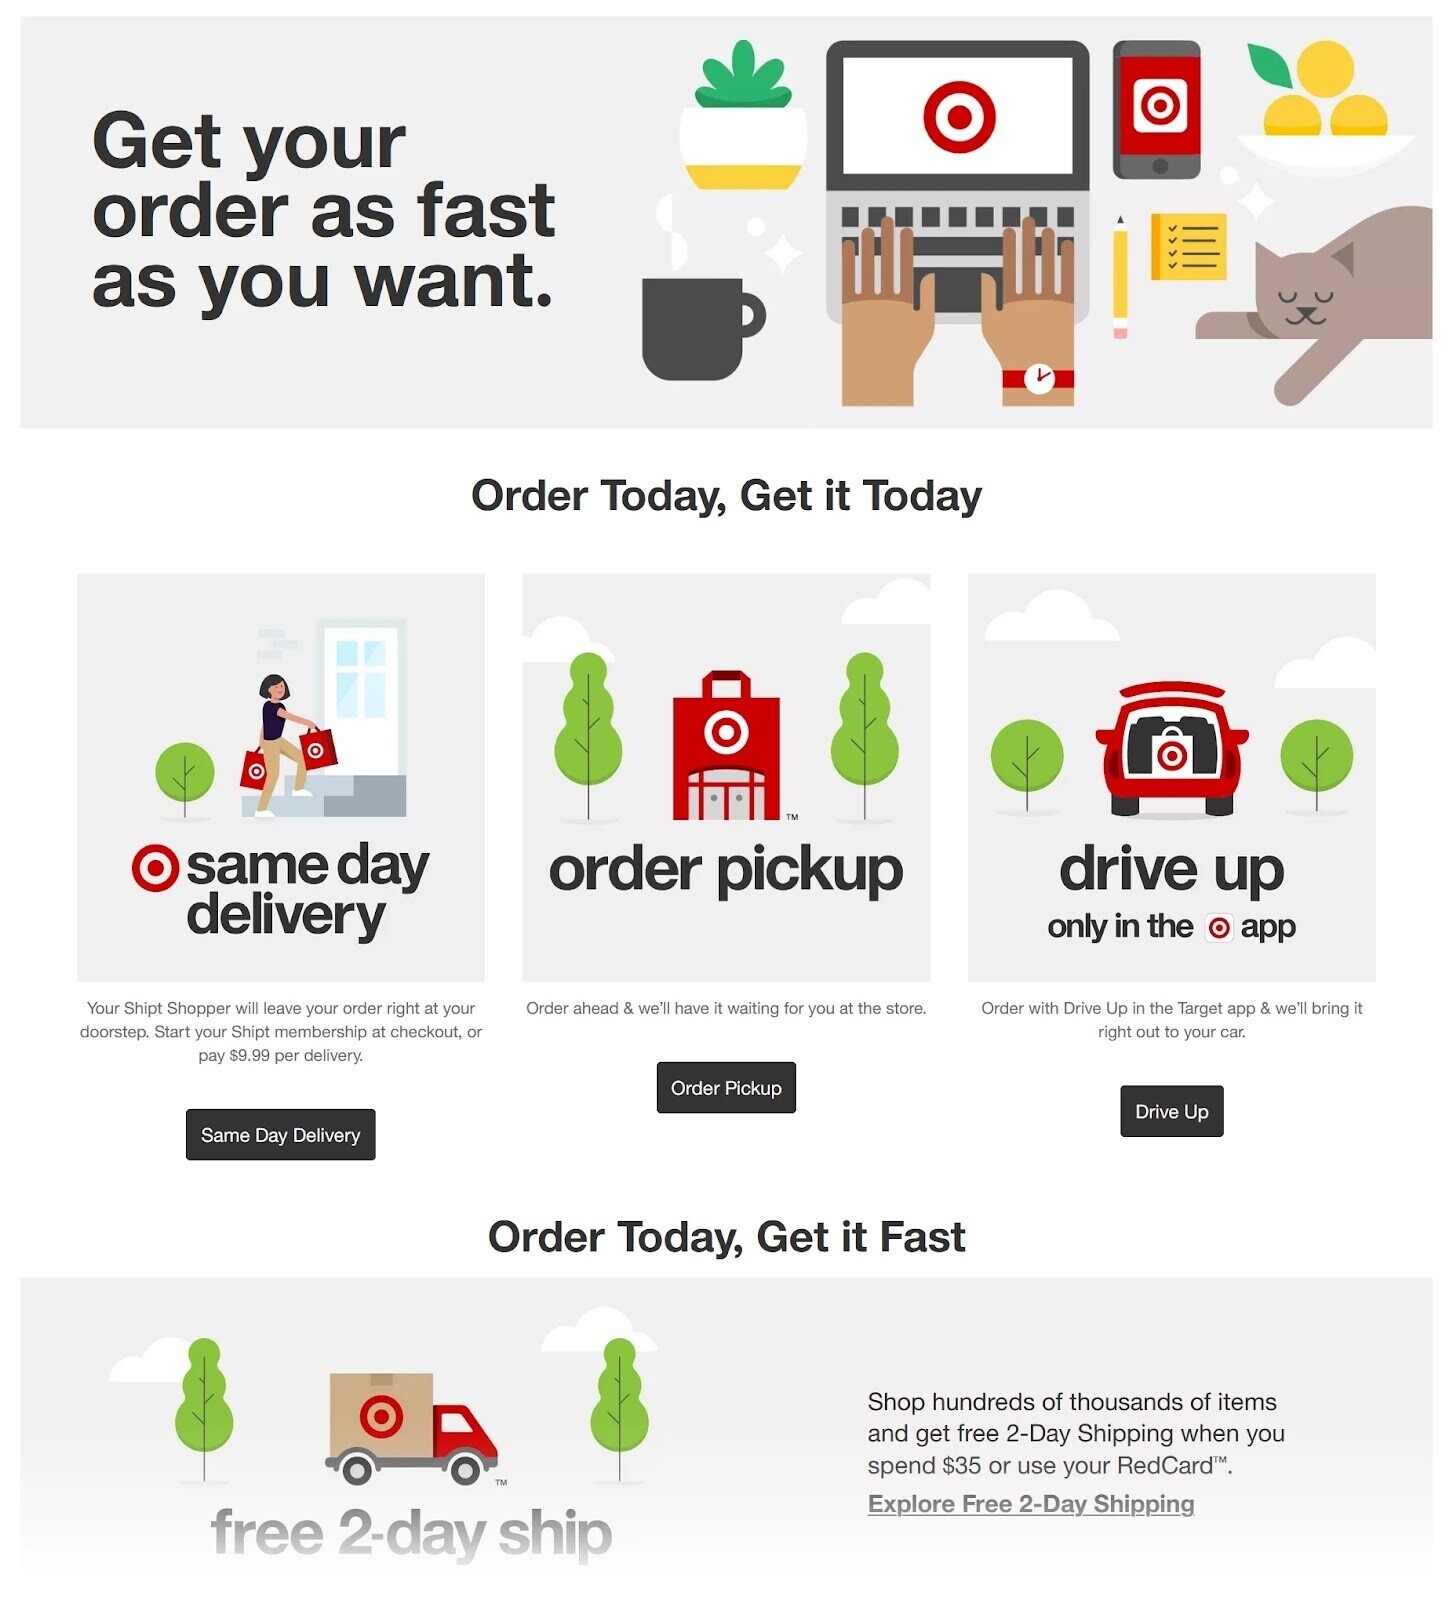 Target’s "Get your order as fast as you want." page